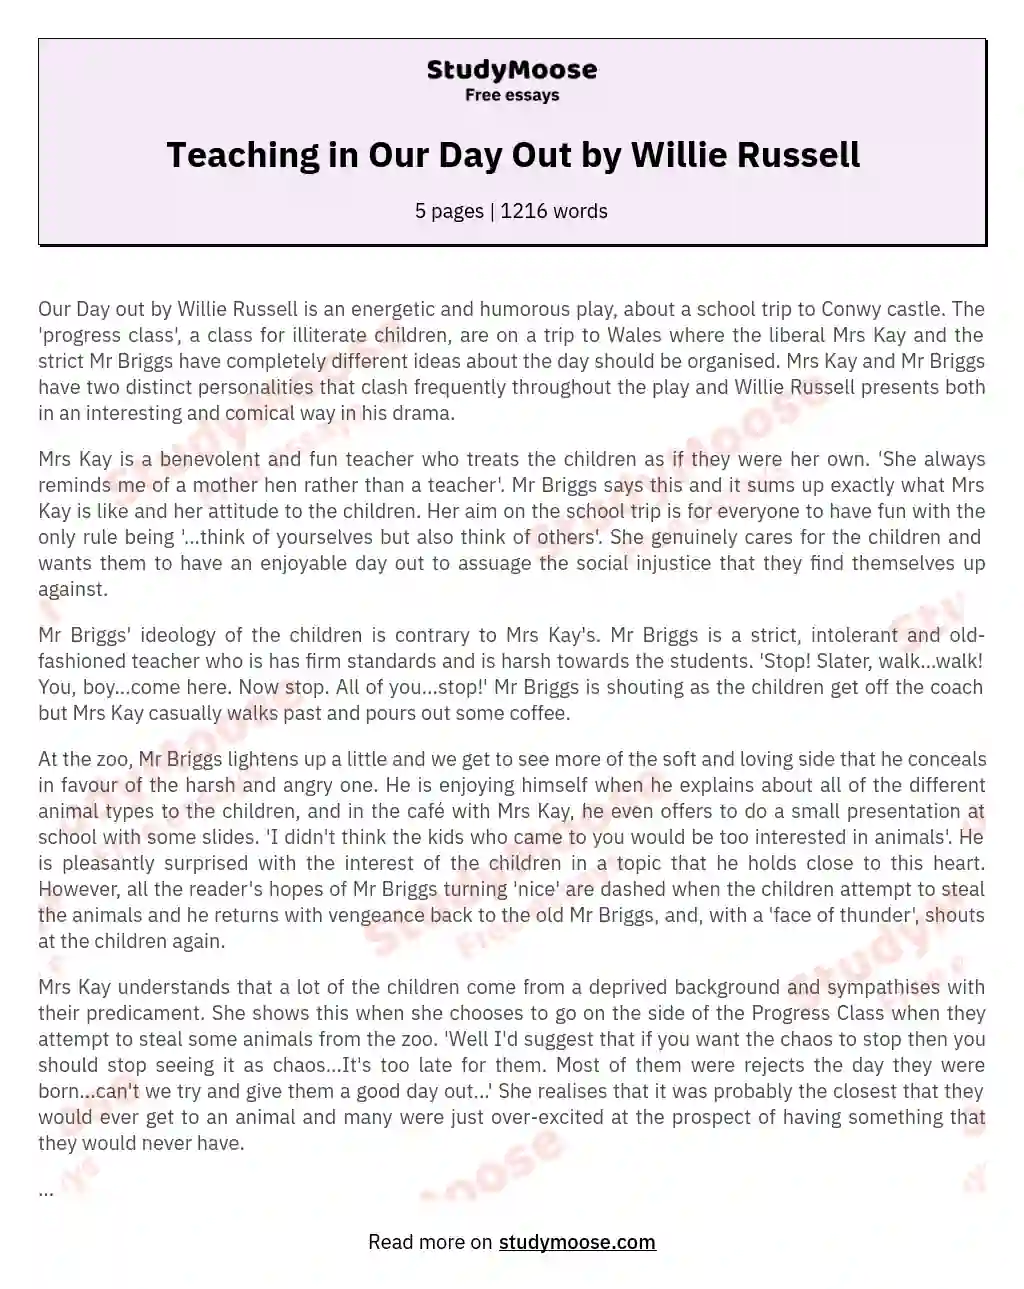 Teaching in Our Day Out by Willie Russell